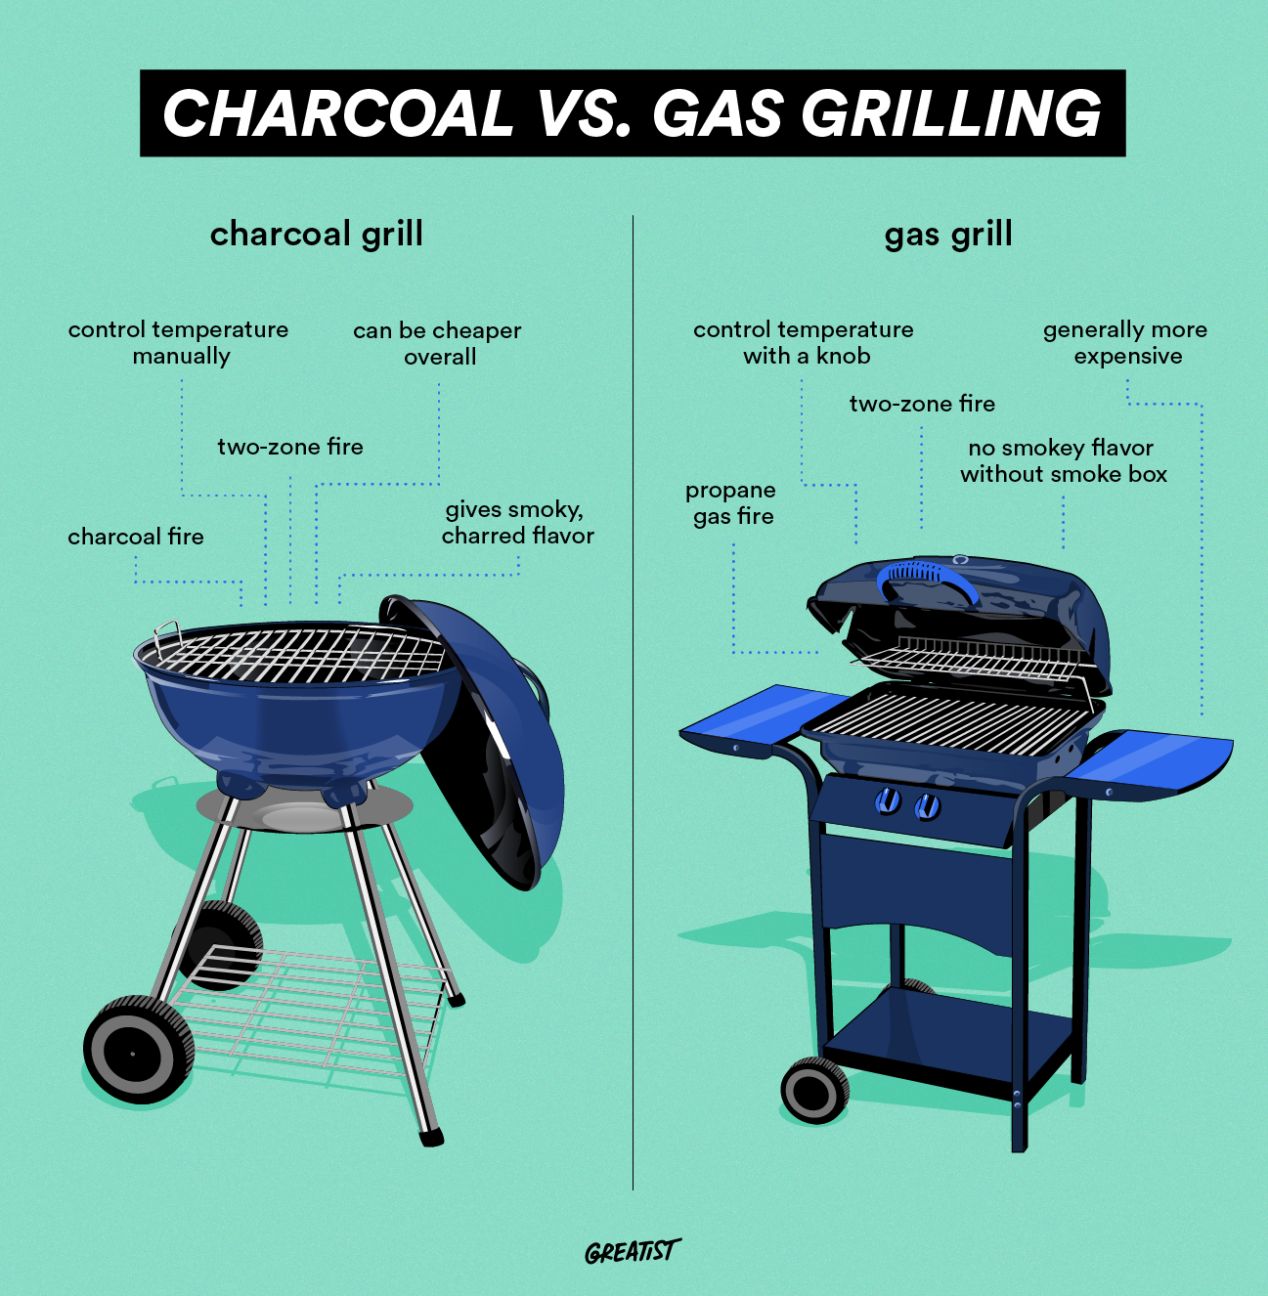 https://media.post.rvohealth.io/wp-content/uploads/sites/2/2021/09/327342-Crash-Course-Grilling-for-Beginners-1296x1326-Body-1268x1296.png